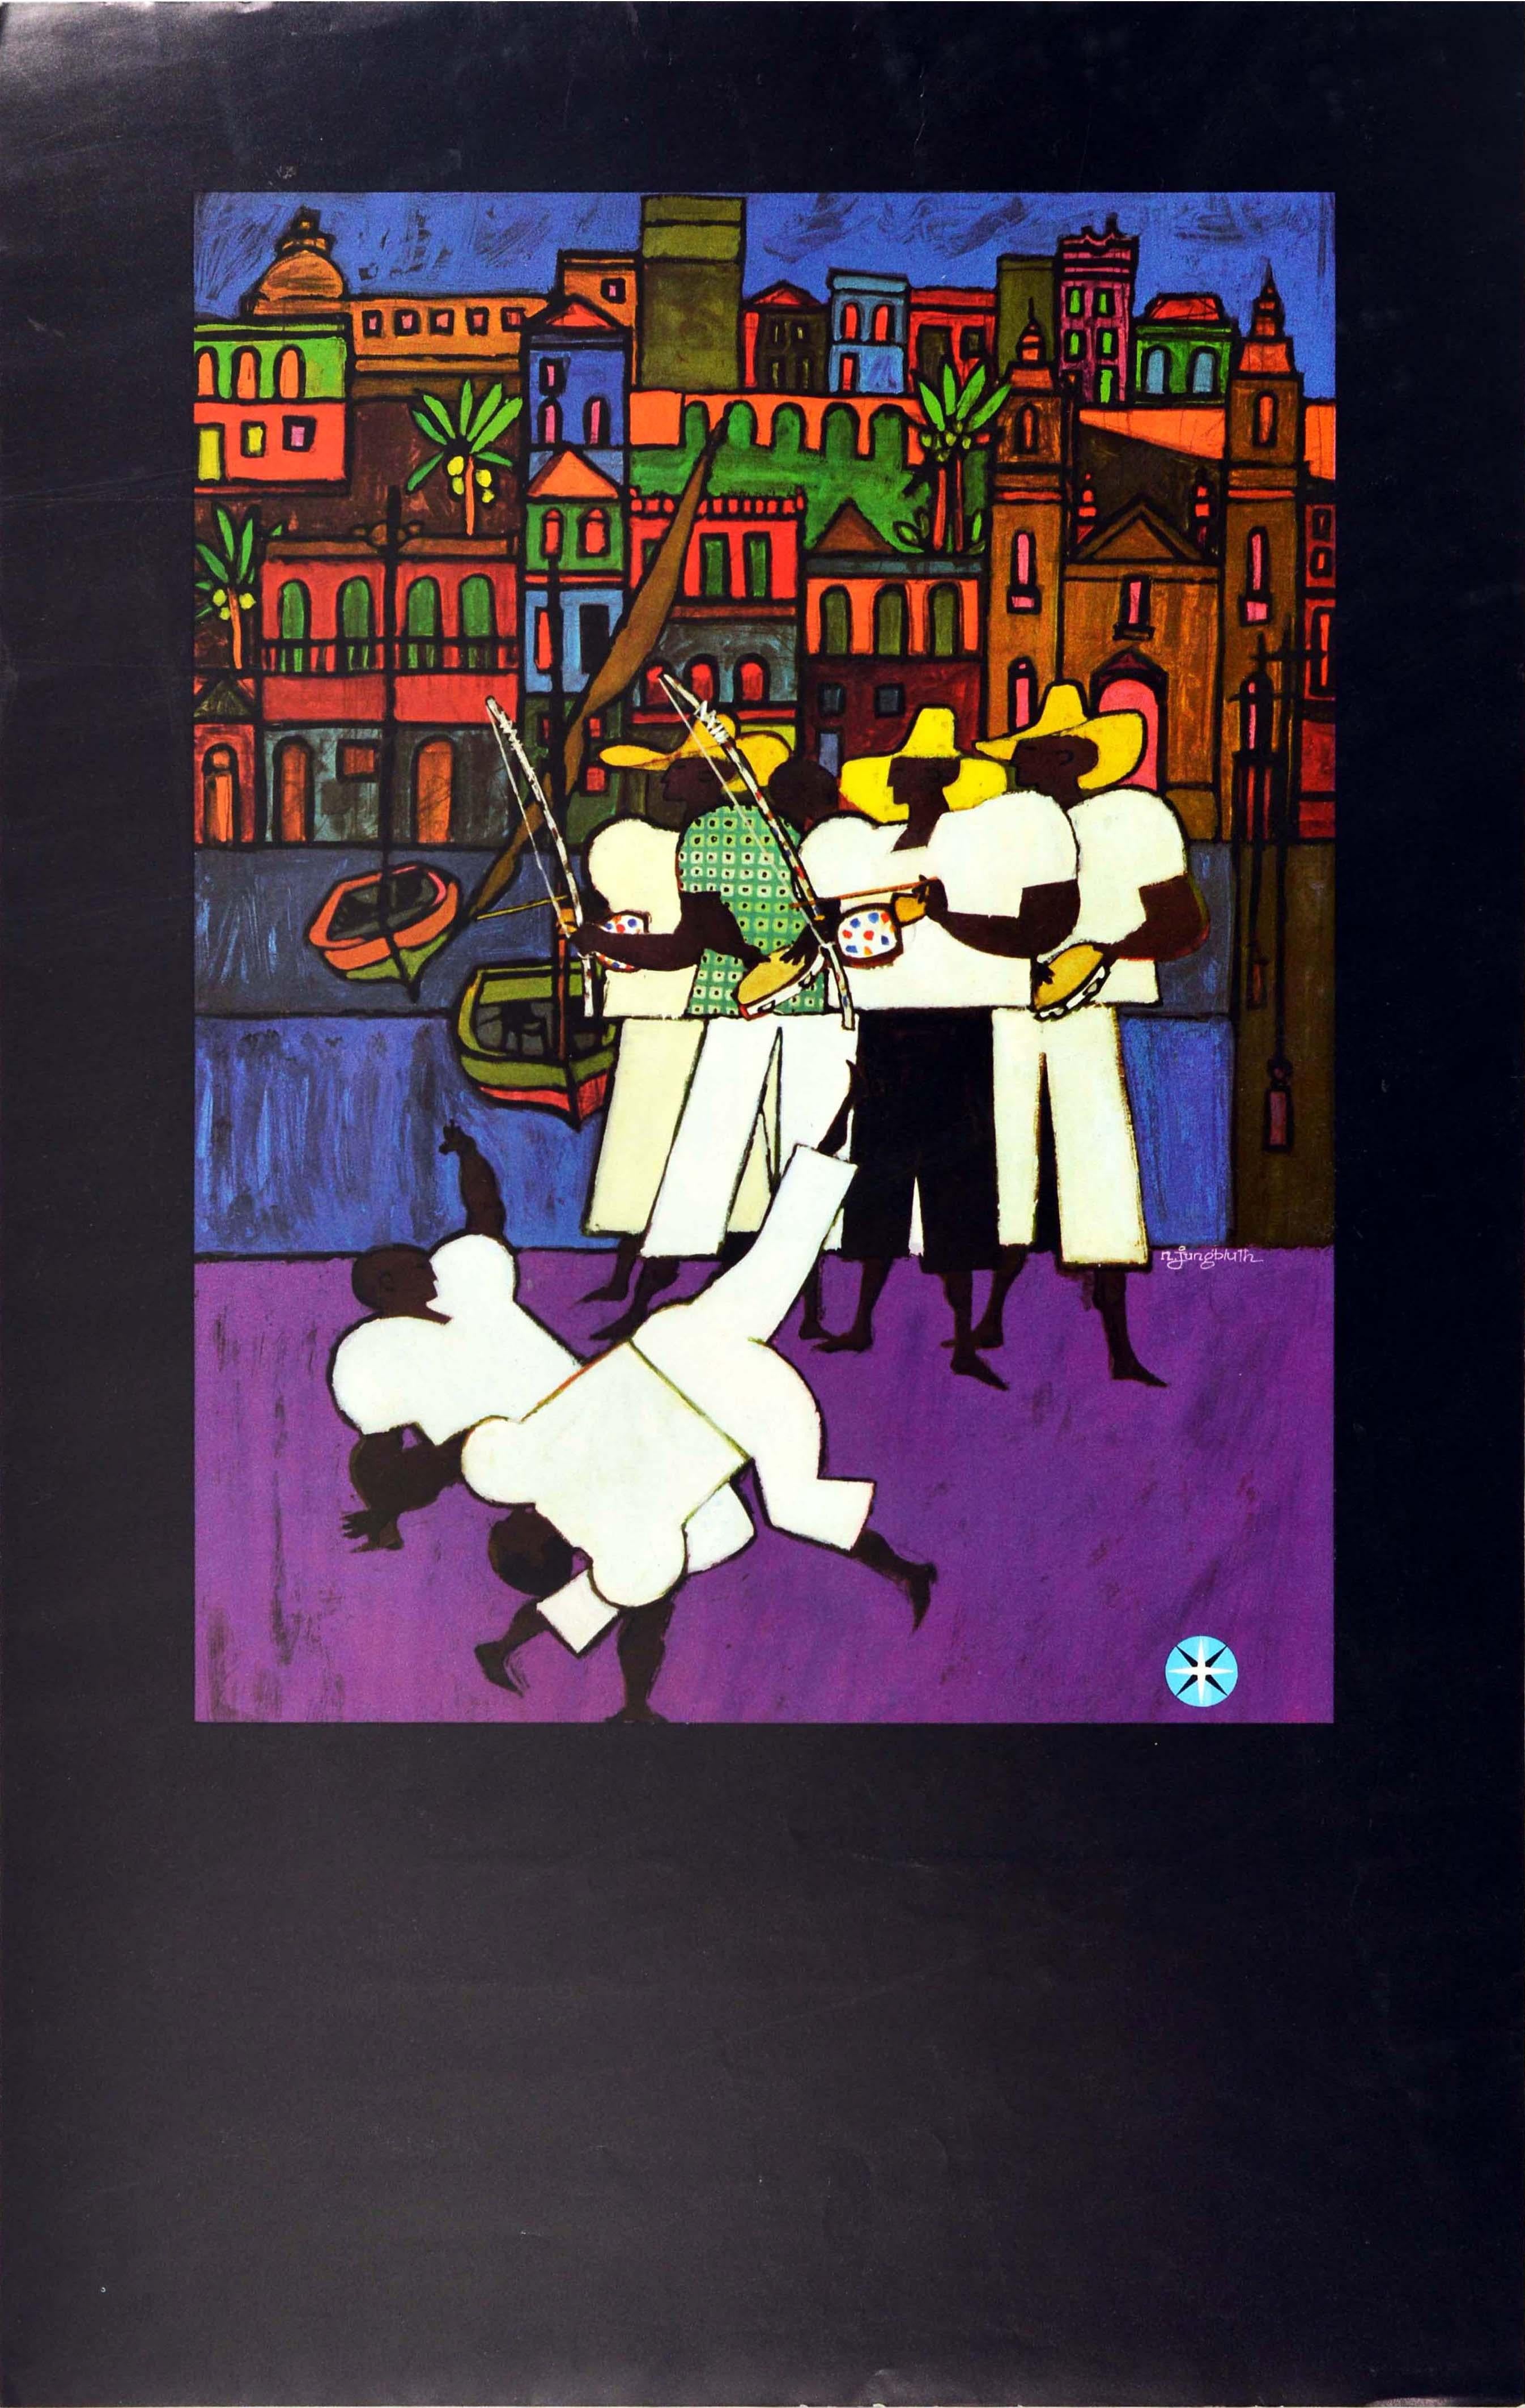 Original vintage double sided South America travel poster for Brasil & Varig airlines featuring a fun and colourful illustration of carnival celebrations depicting people dancing a Frevo dance dressed in white shirts and holding pink umbrellas to